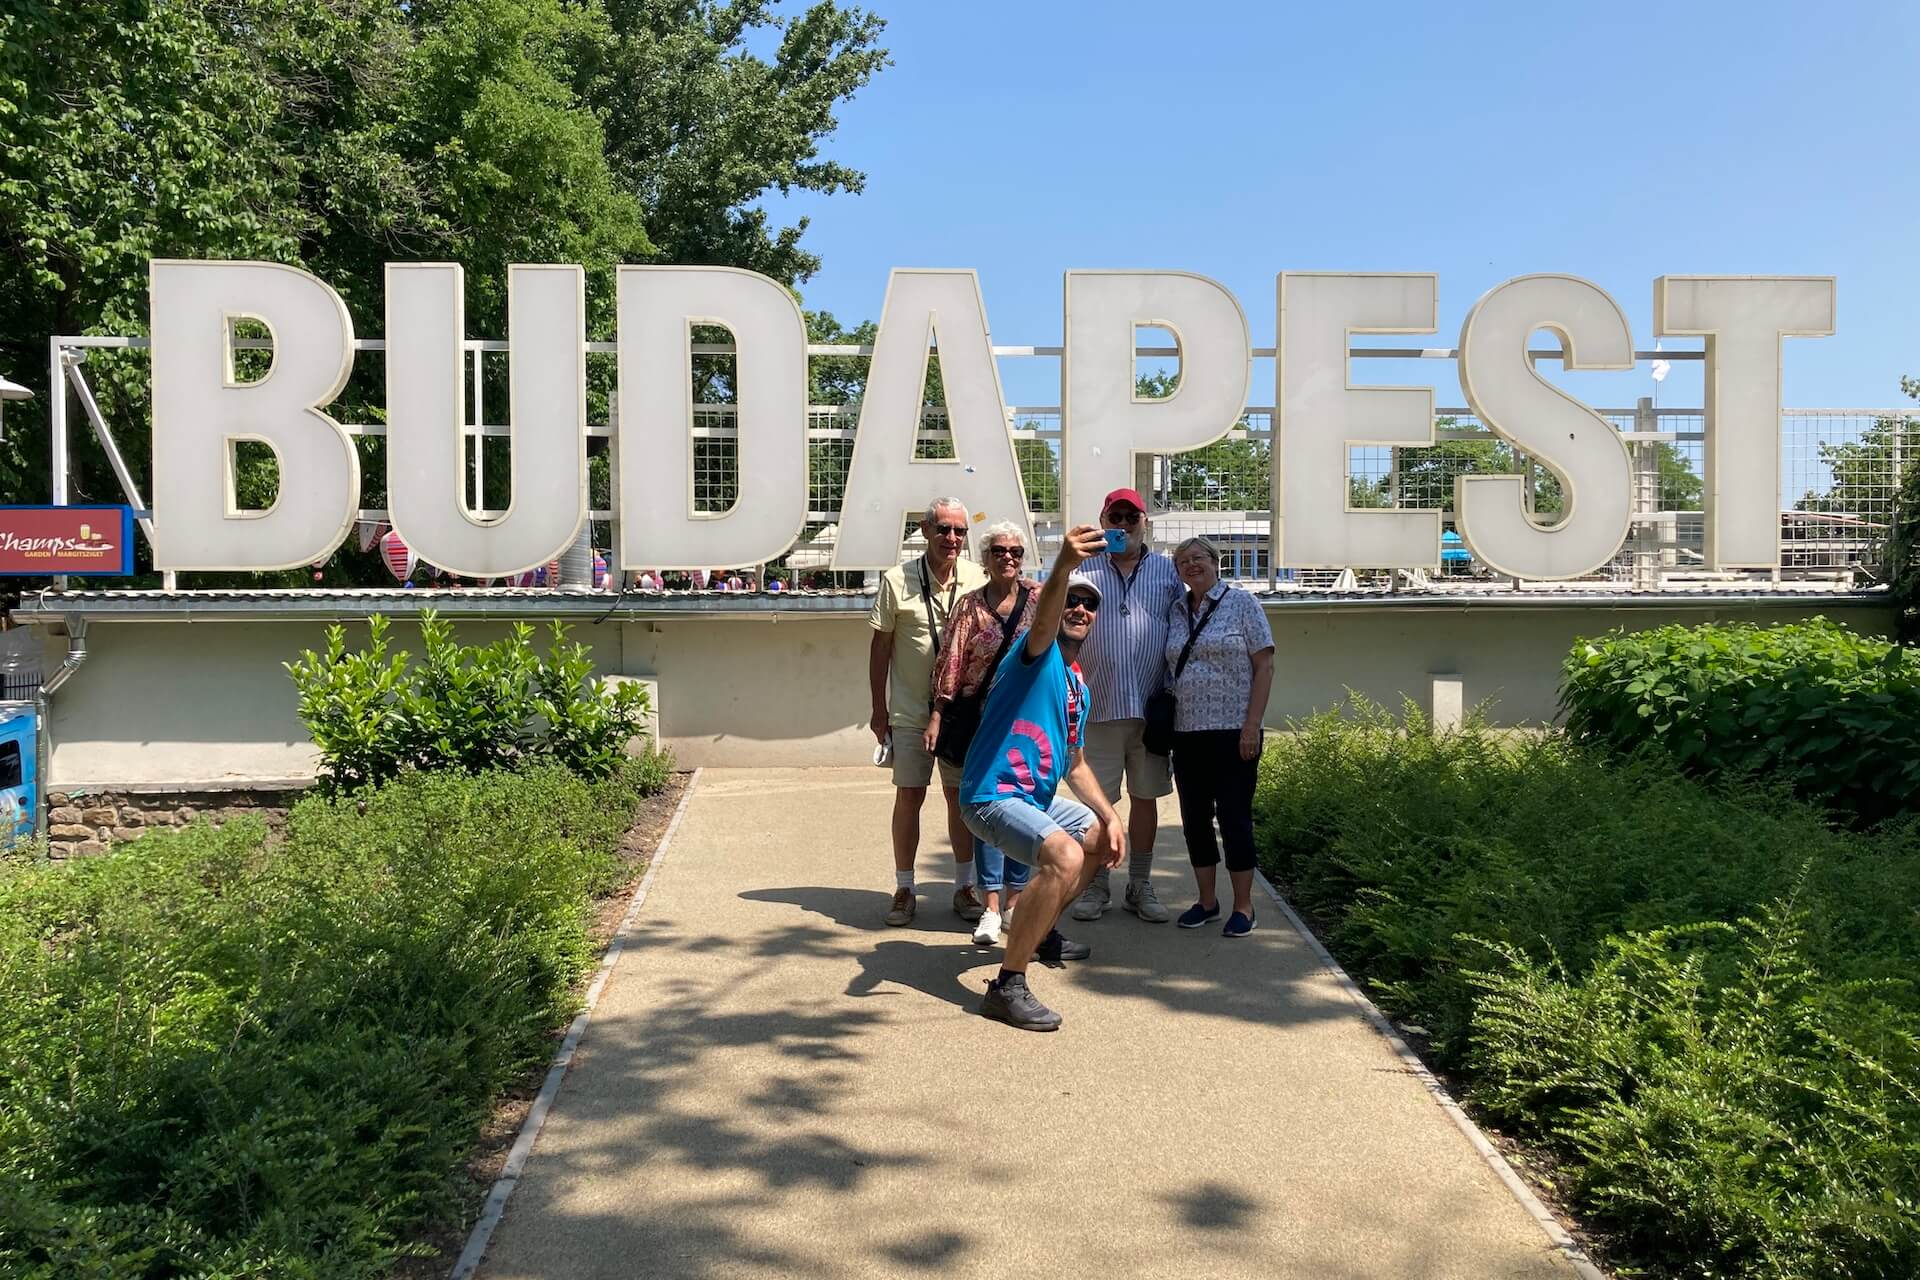 Taking a photo in front of the giant Budapest sign on Margaret Island.